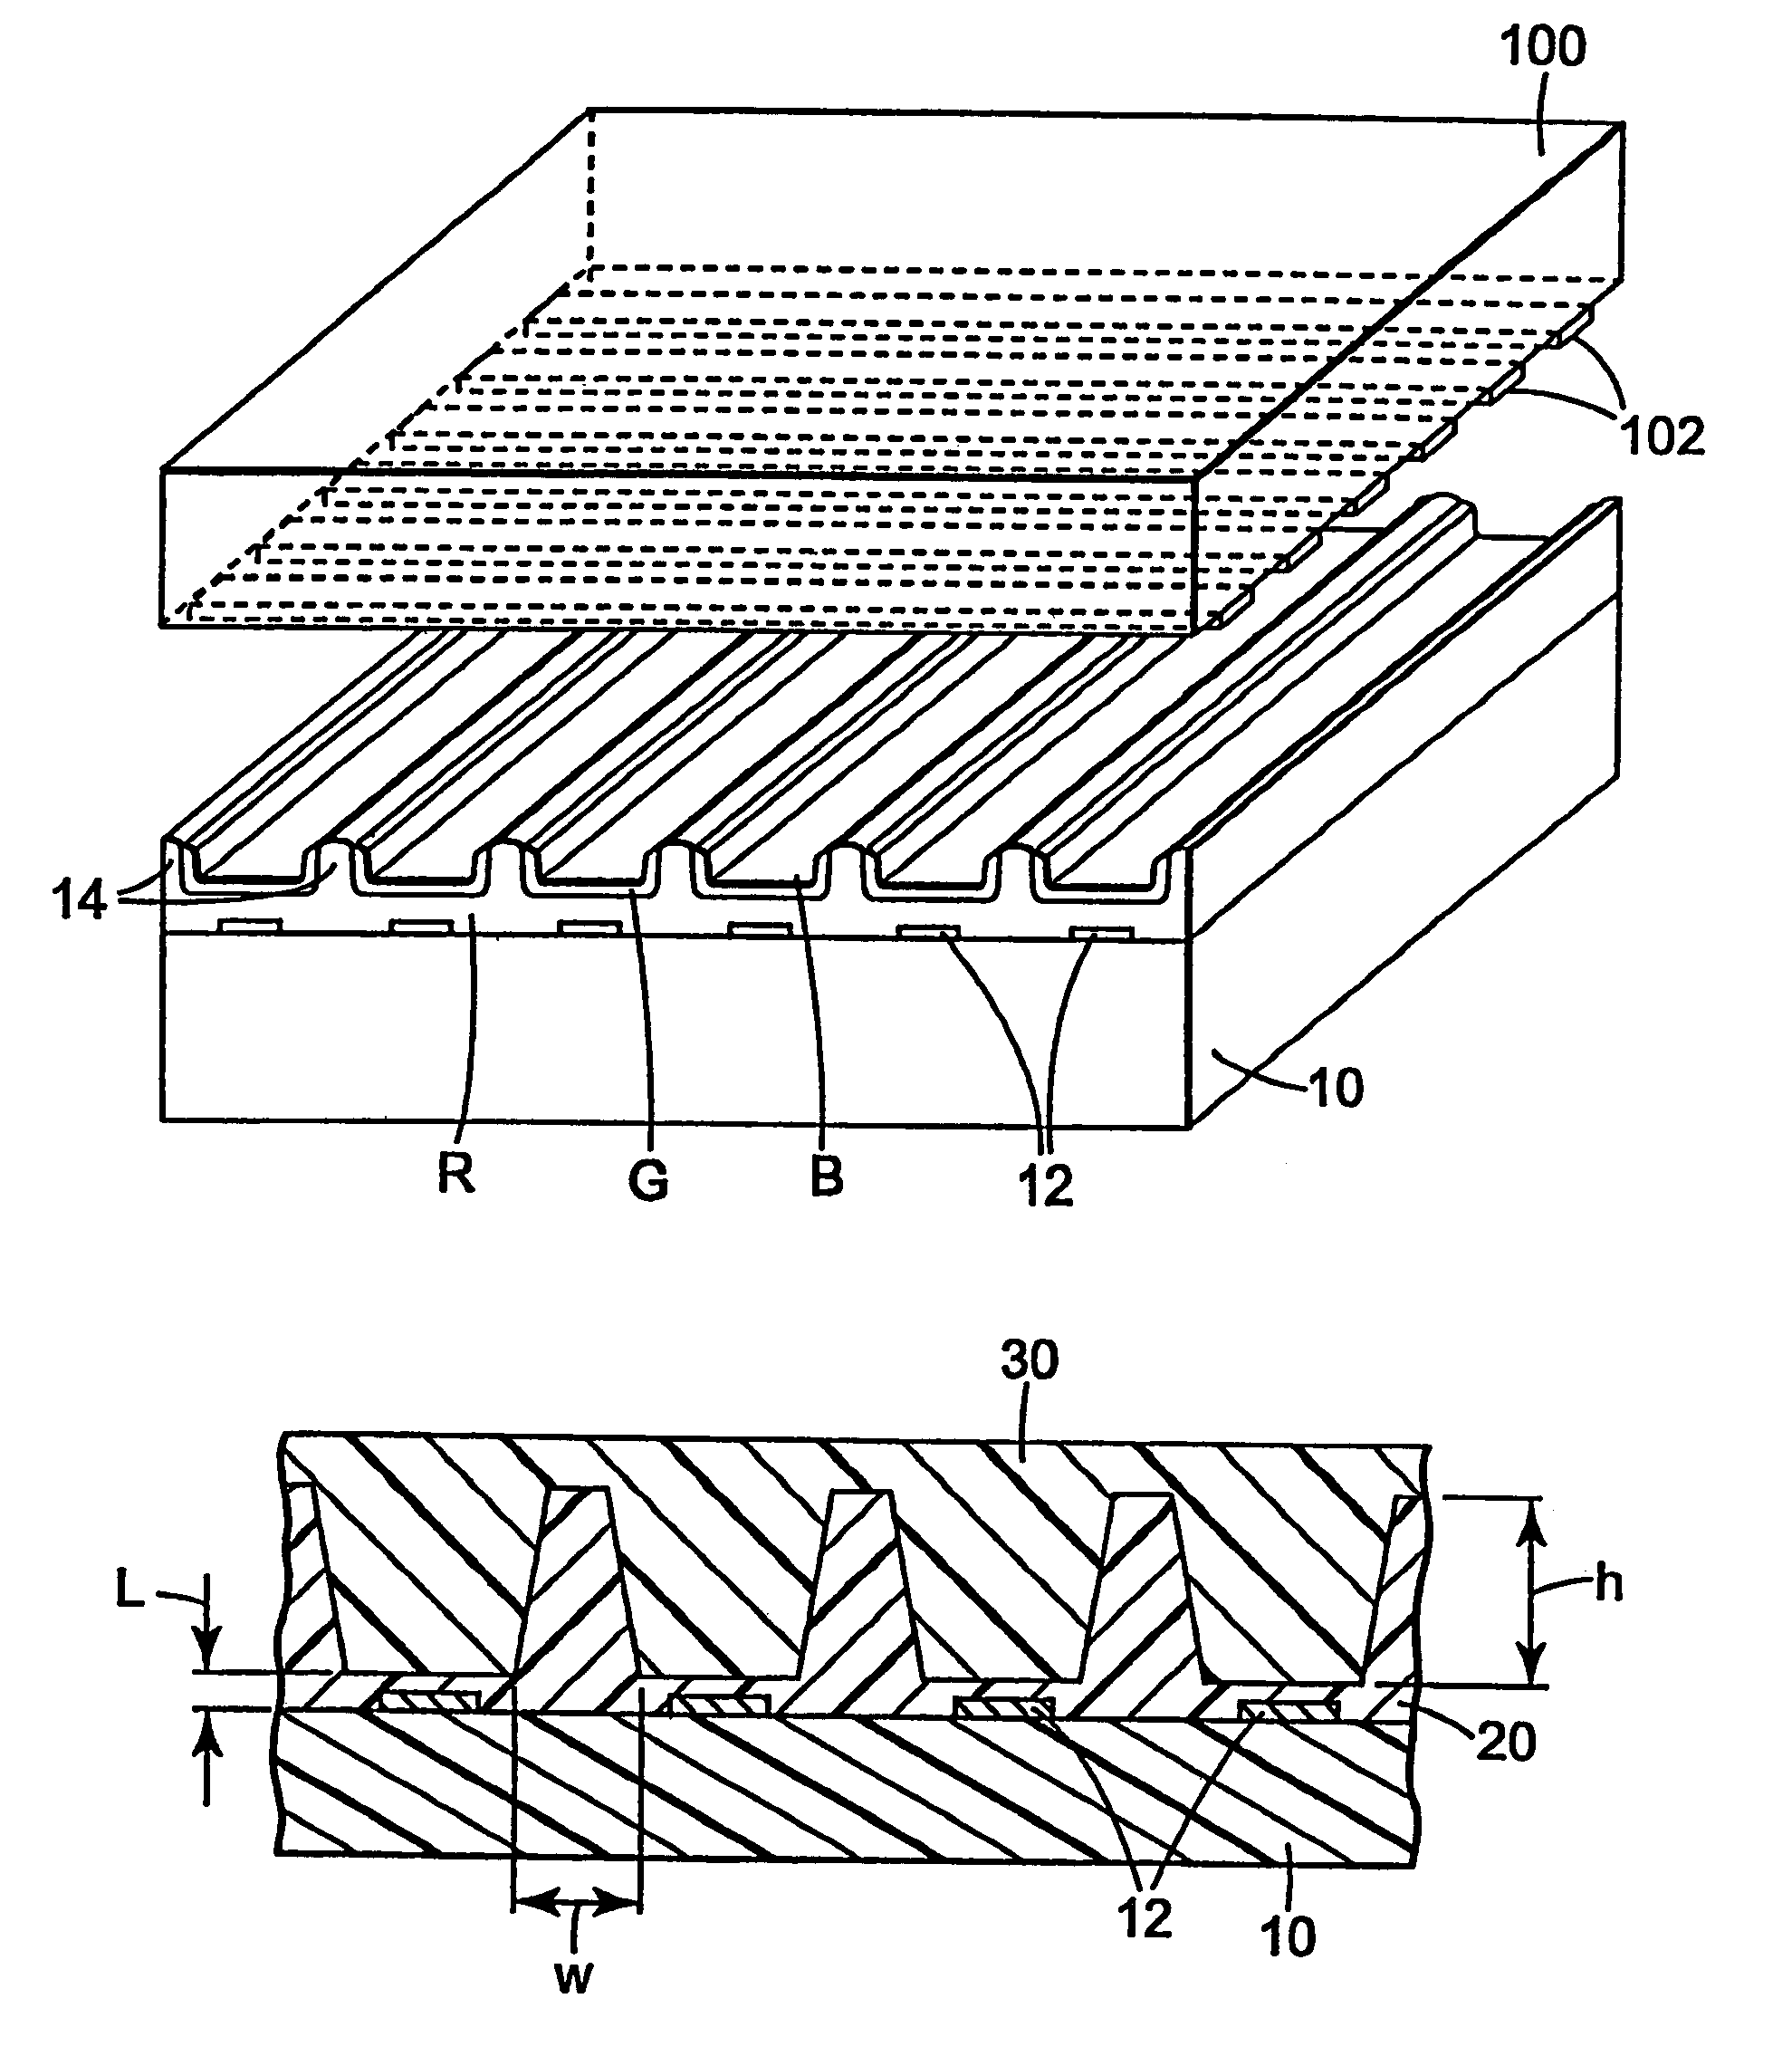 Method for precise molding and alignment of structures on a substrate using a stretchable mold